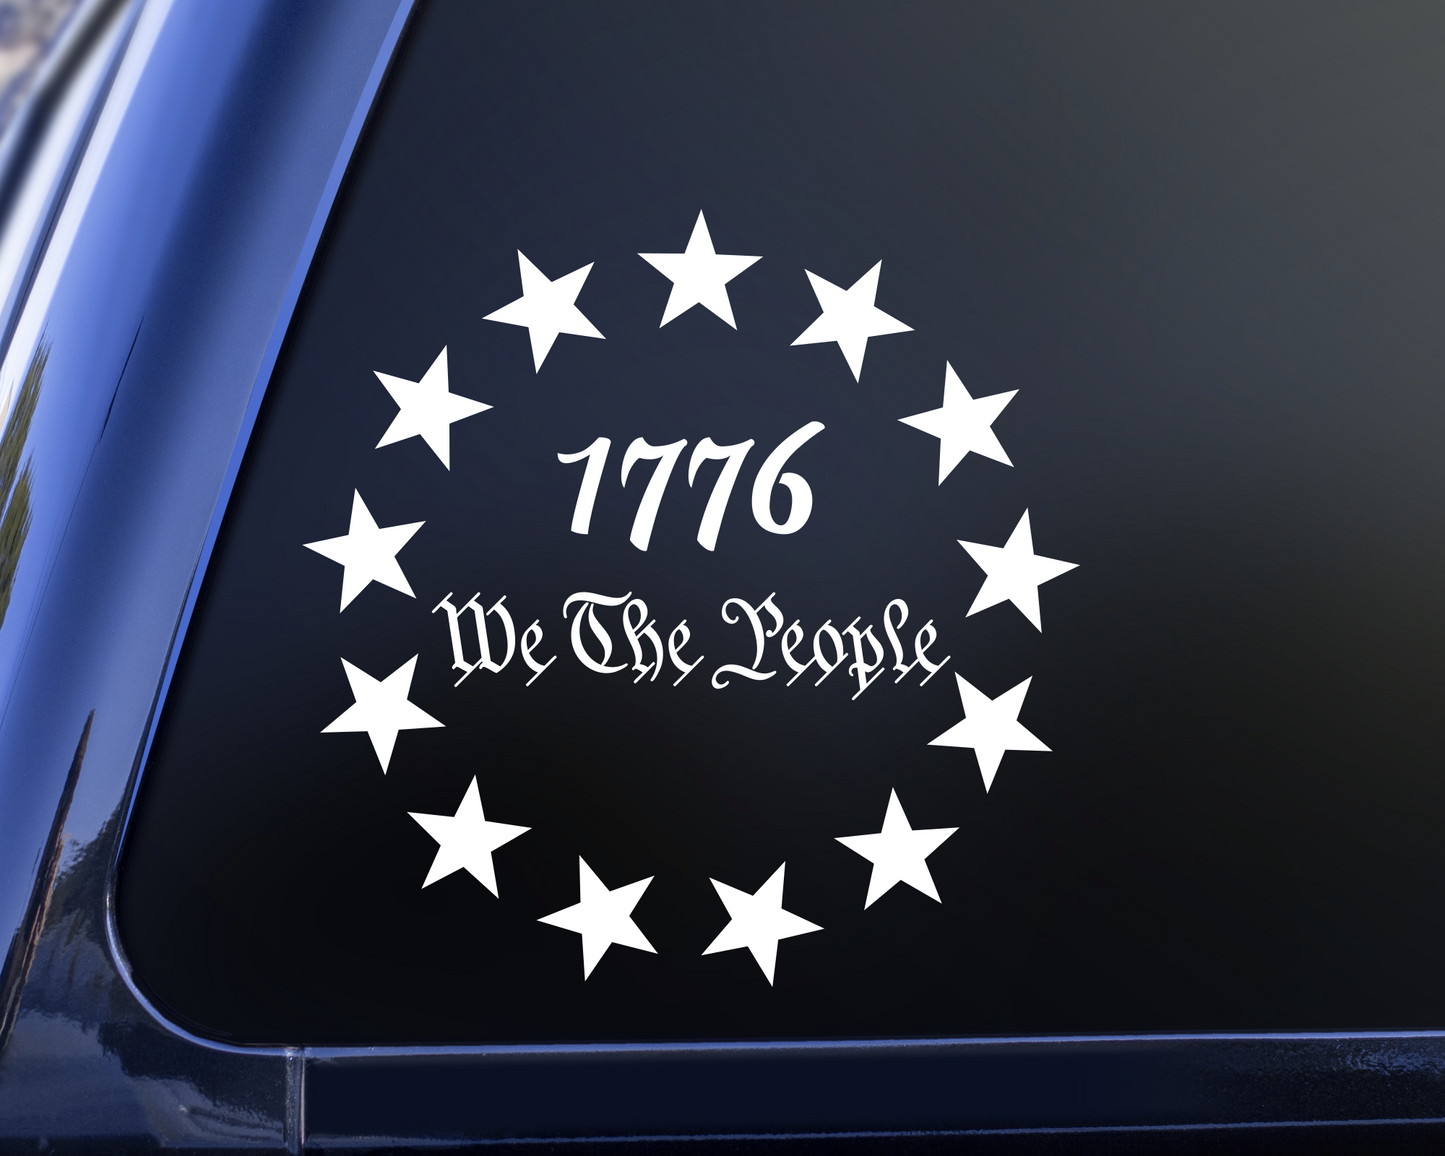 Circle of Stars 1776 We the people decal